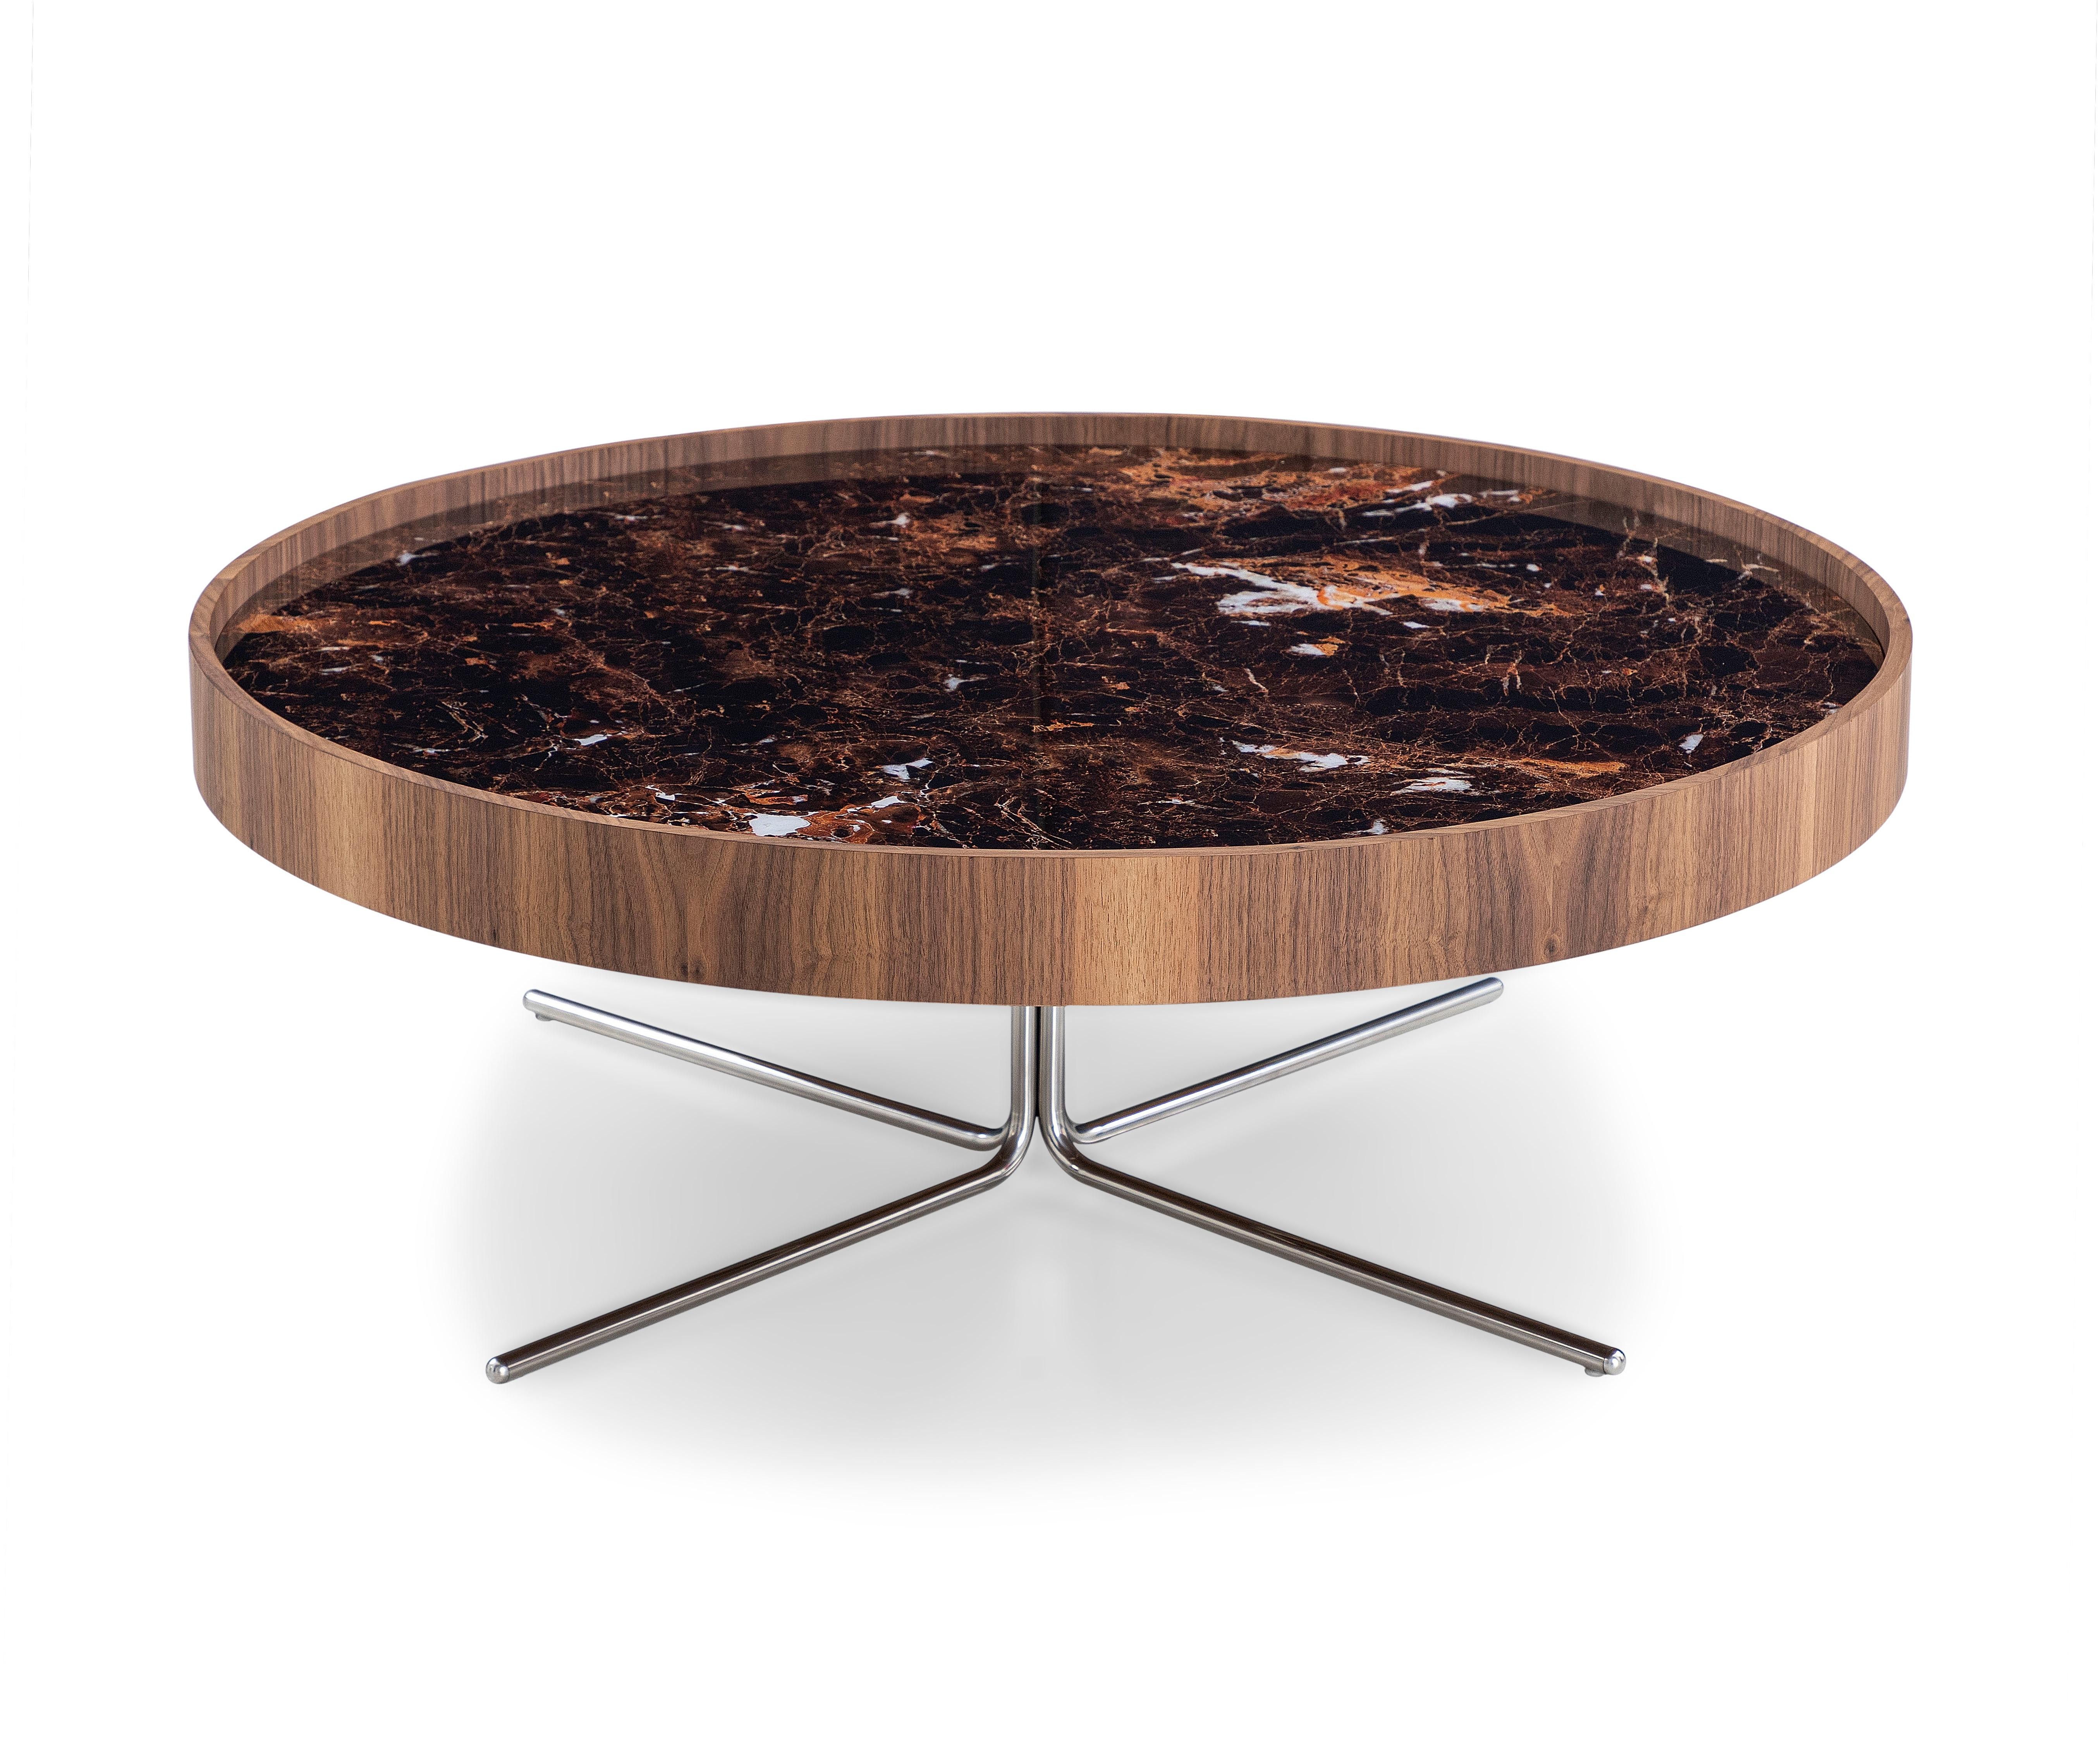 Brazilian Regia Occasional Table in Walnut Wood Finish and Imperial Brown Glass, Set of 3 For Sale